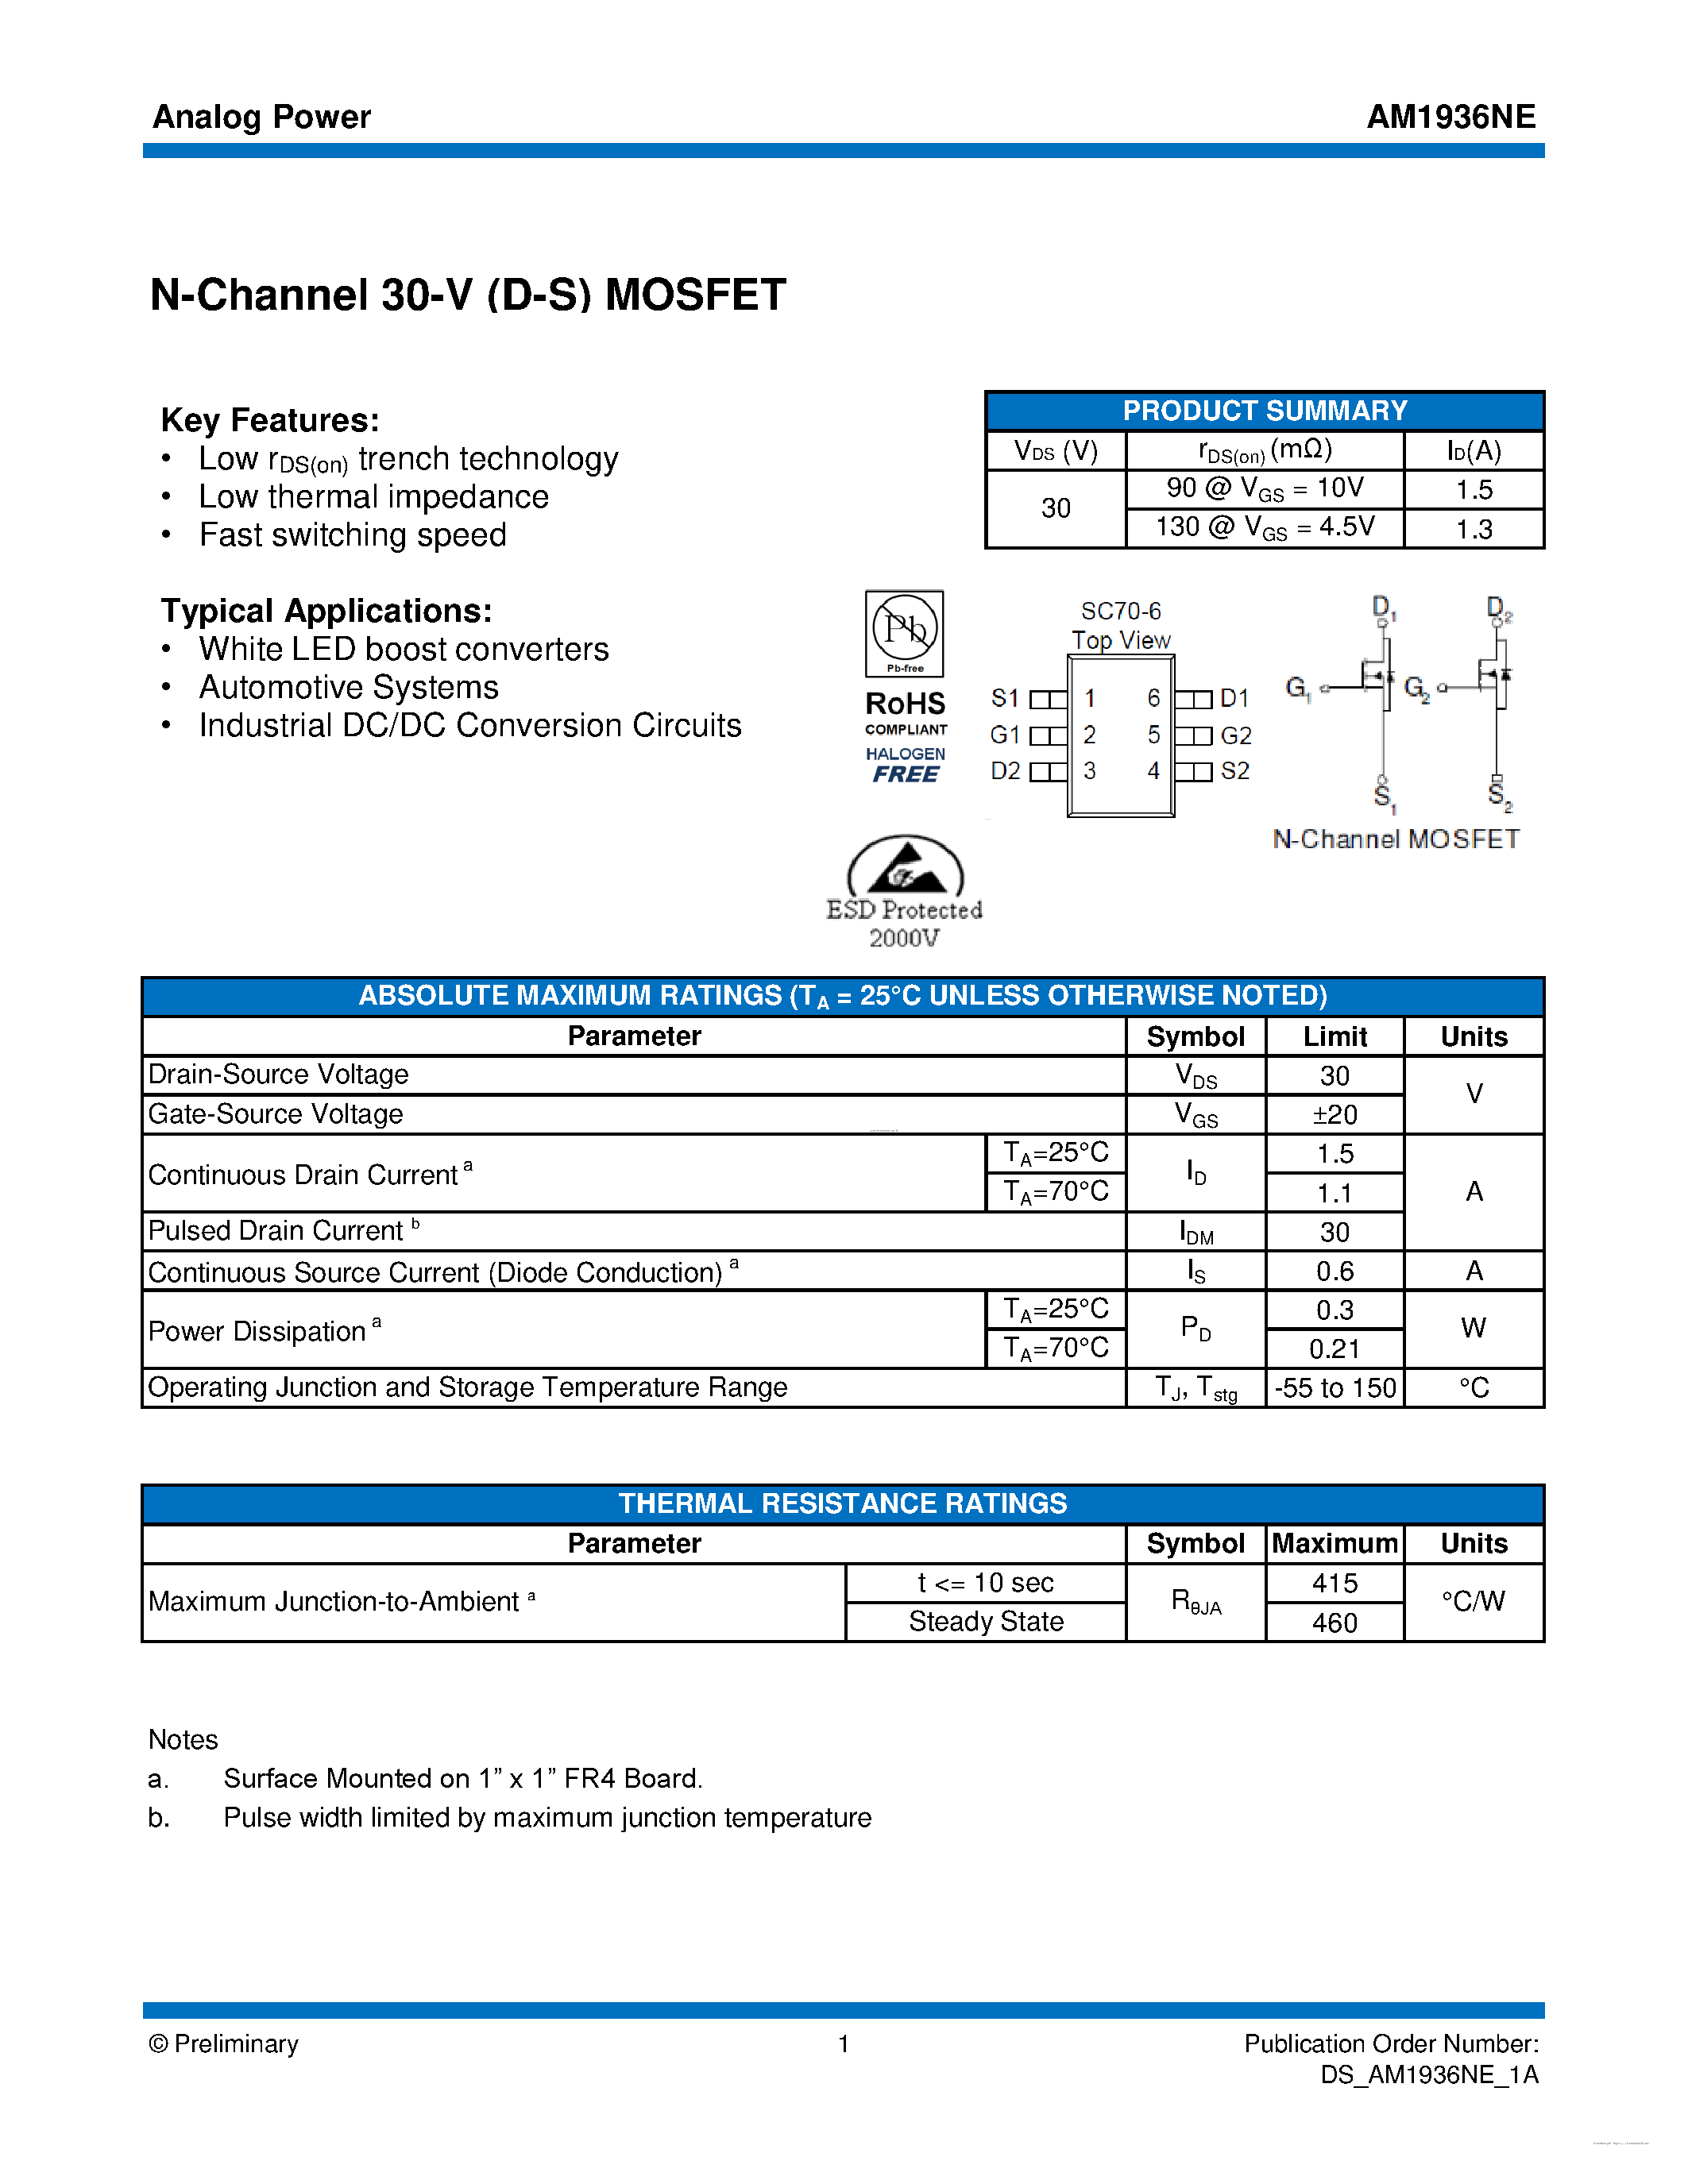 Datasheet AM1936NE - N-Channel 30-V (D-S) MOSFET page 1